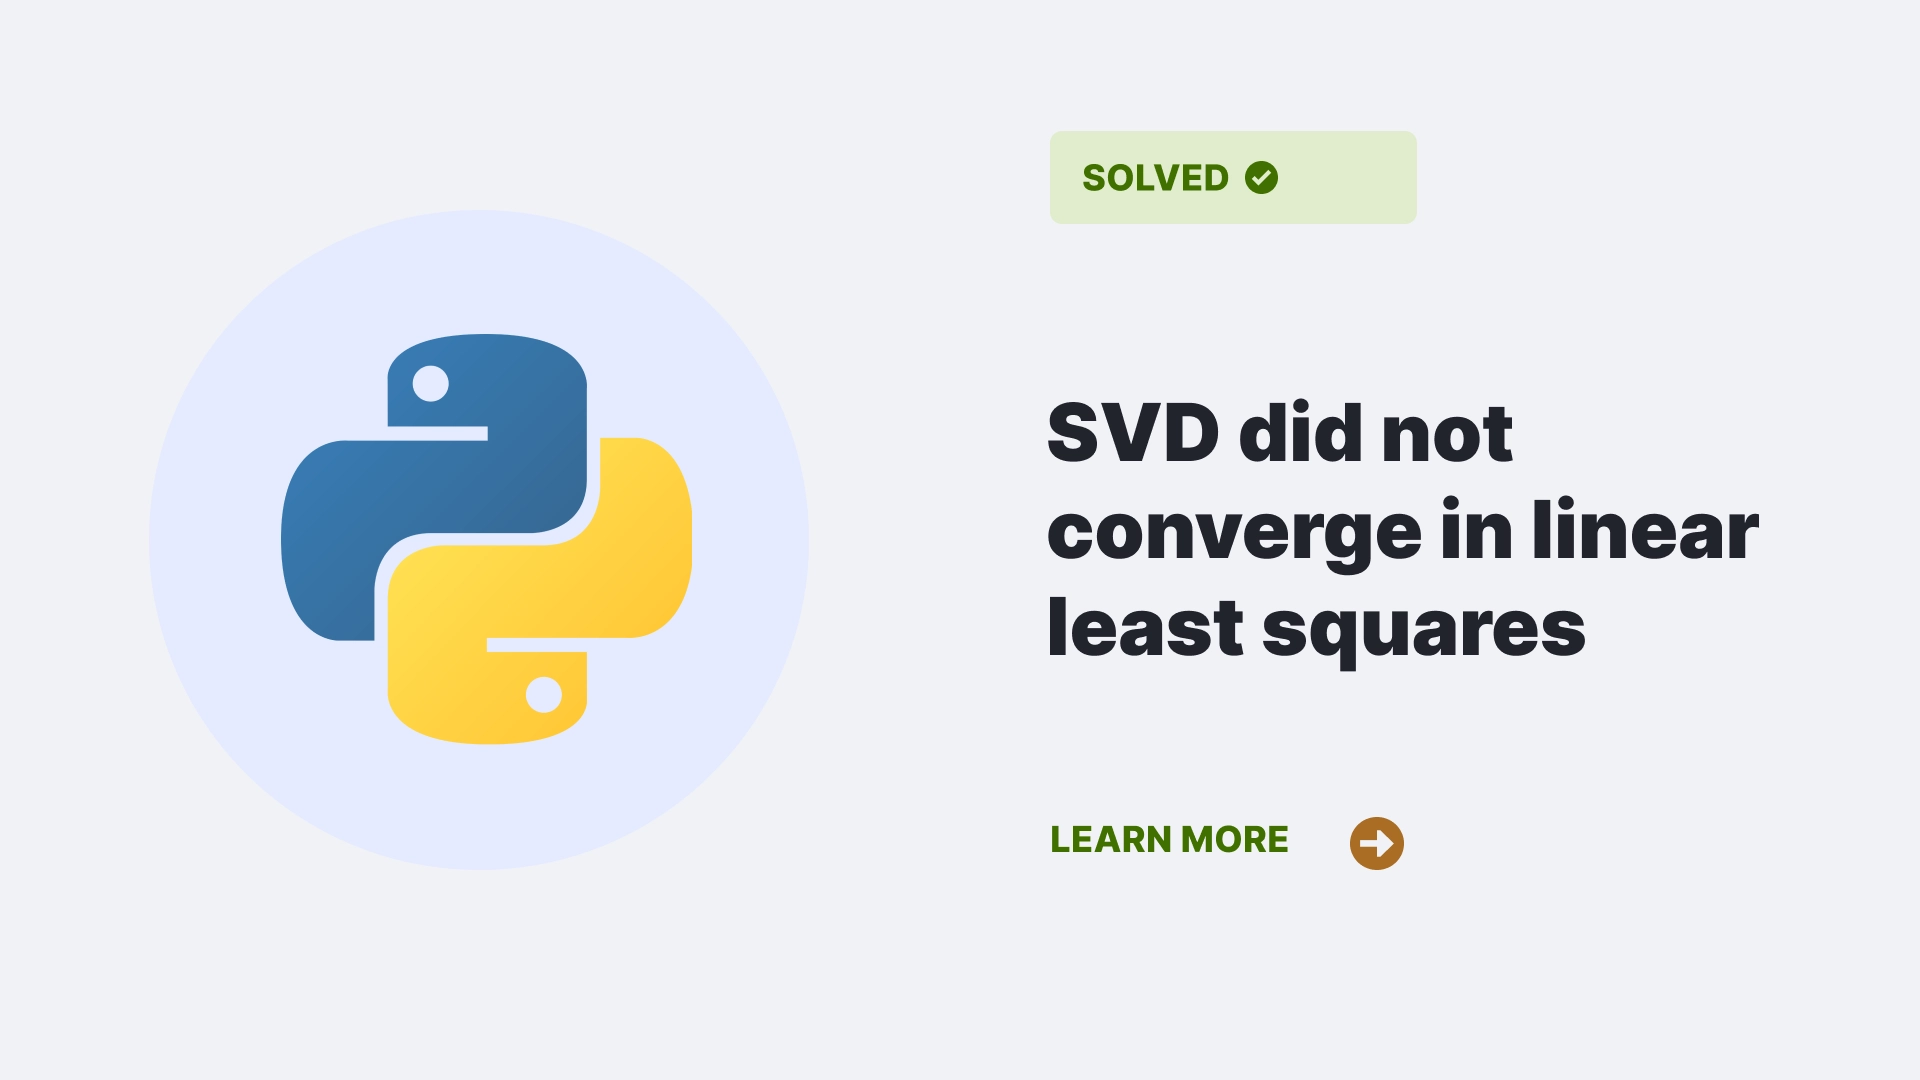 SVD did not converge in linear least squares